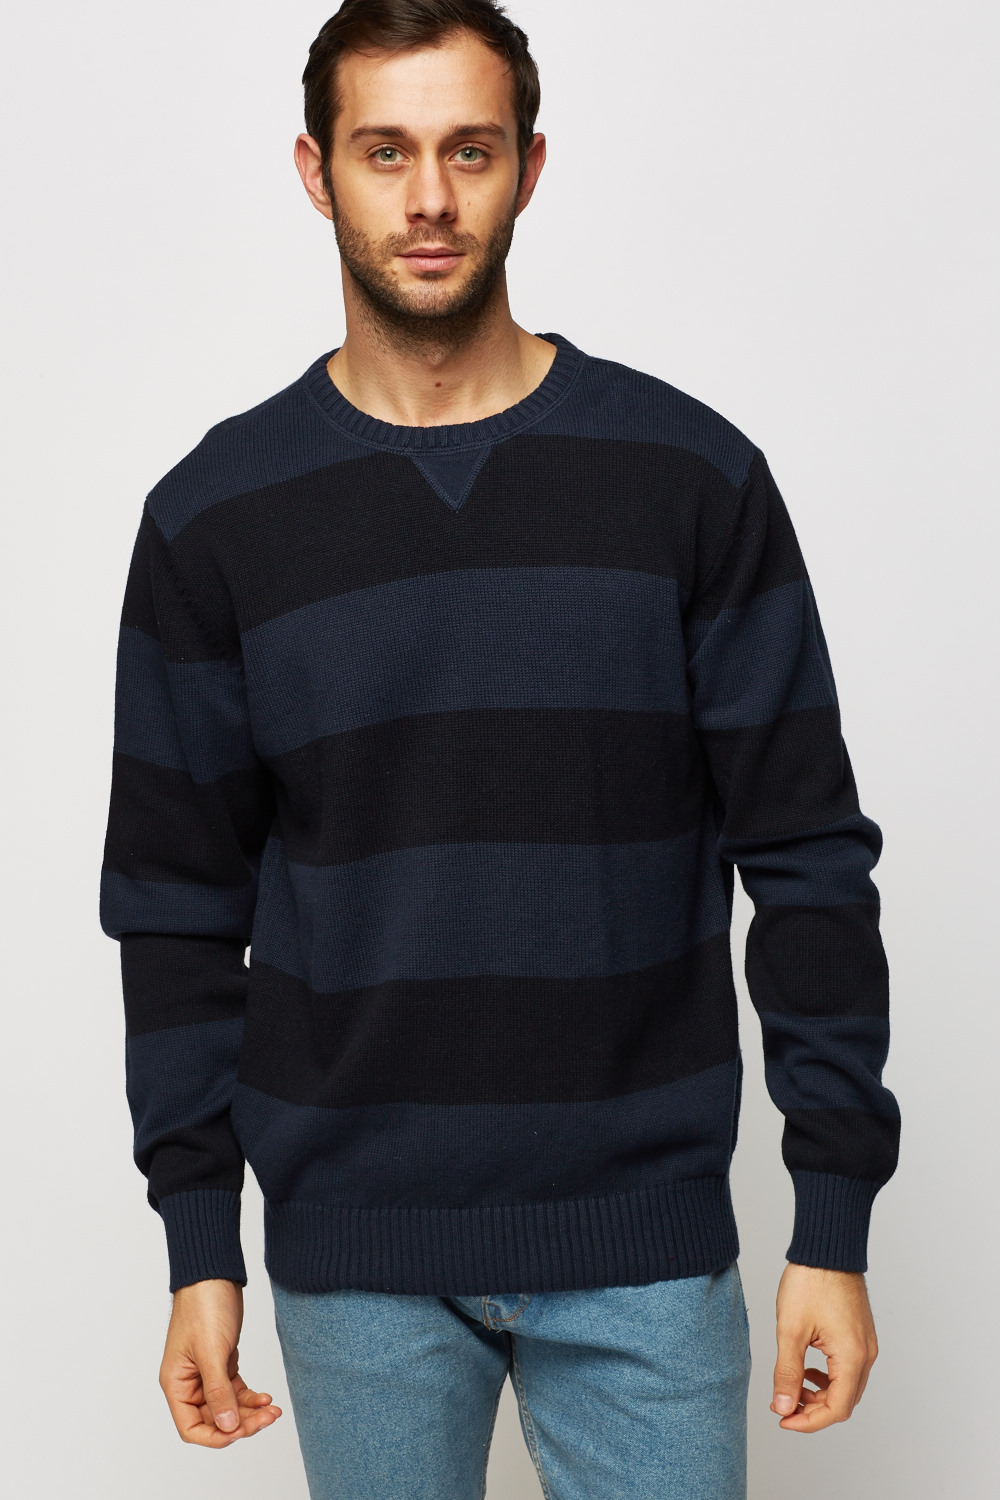 Striped Knitted Round Neck Jumper - Just £5